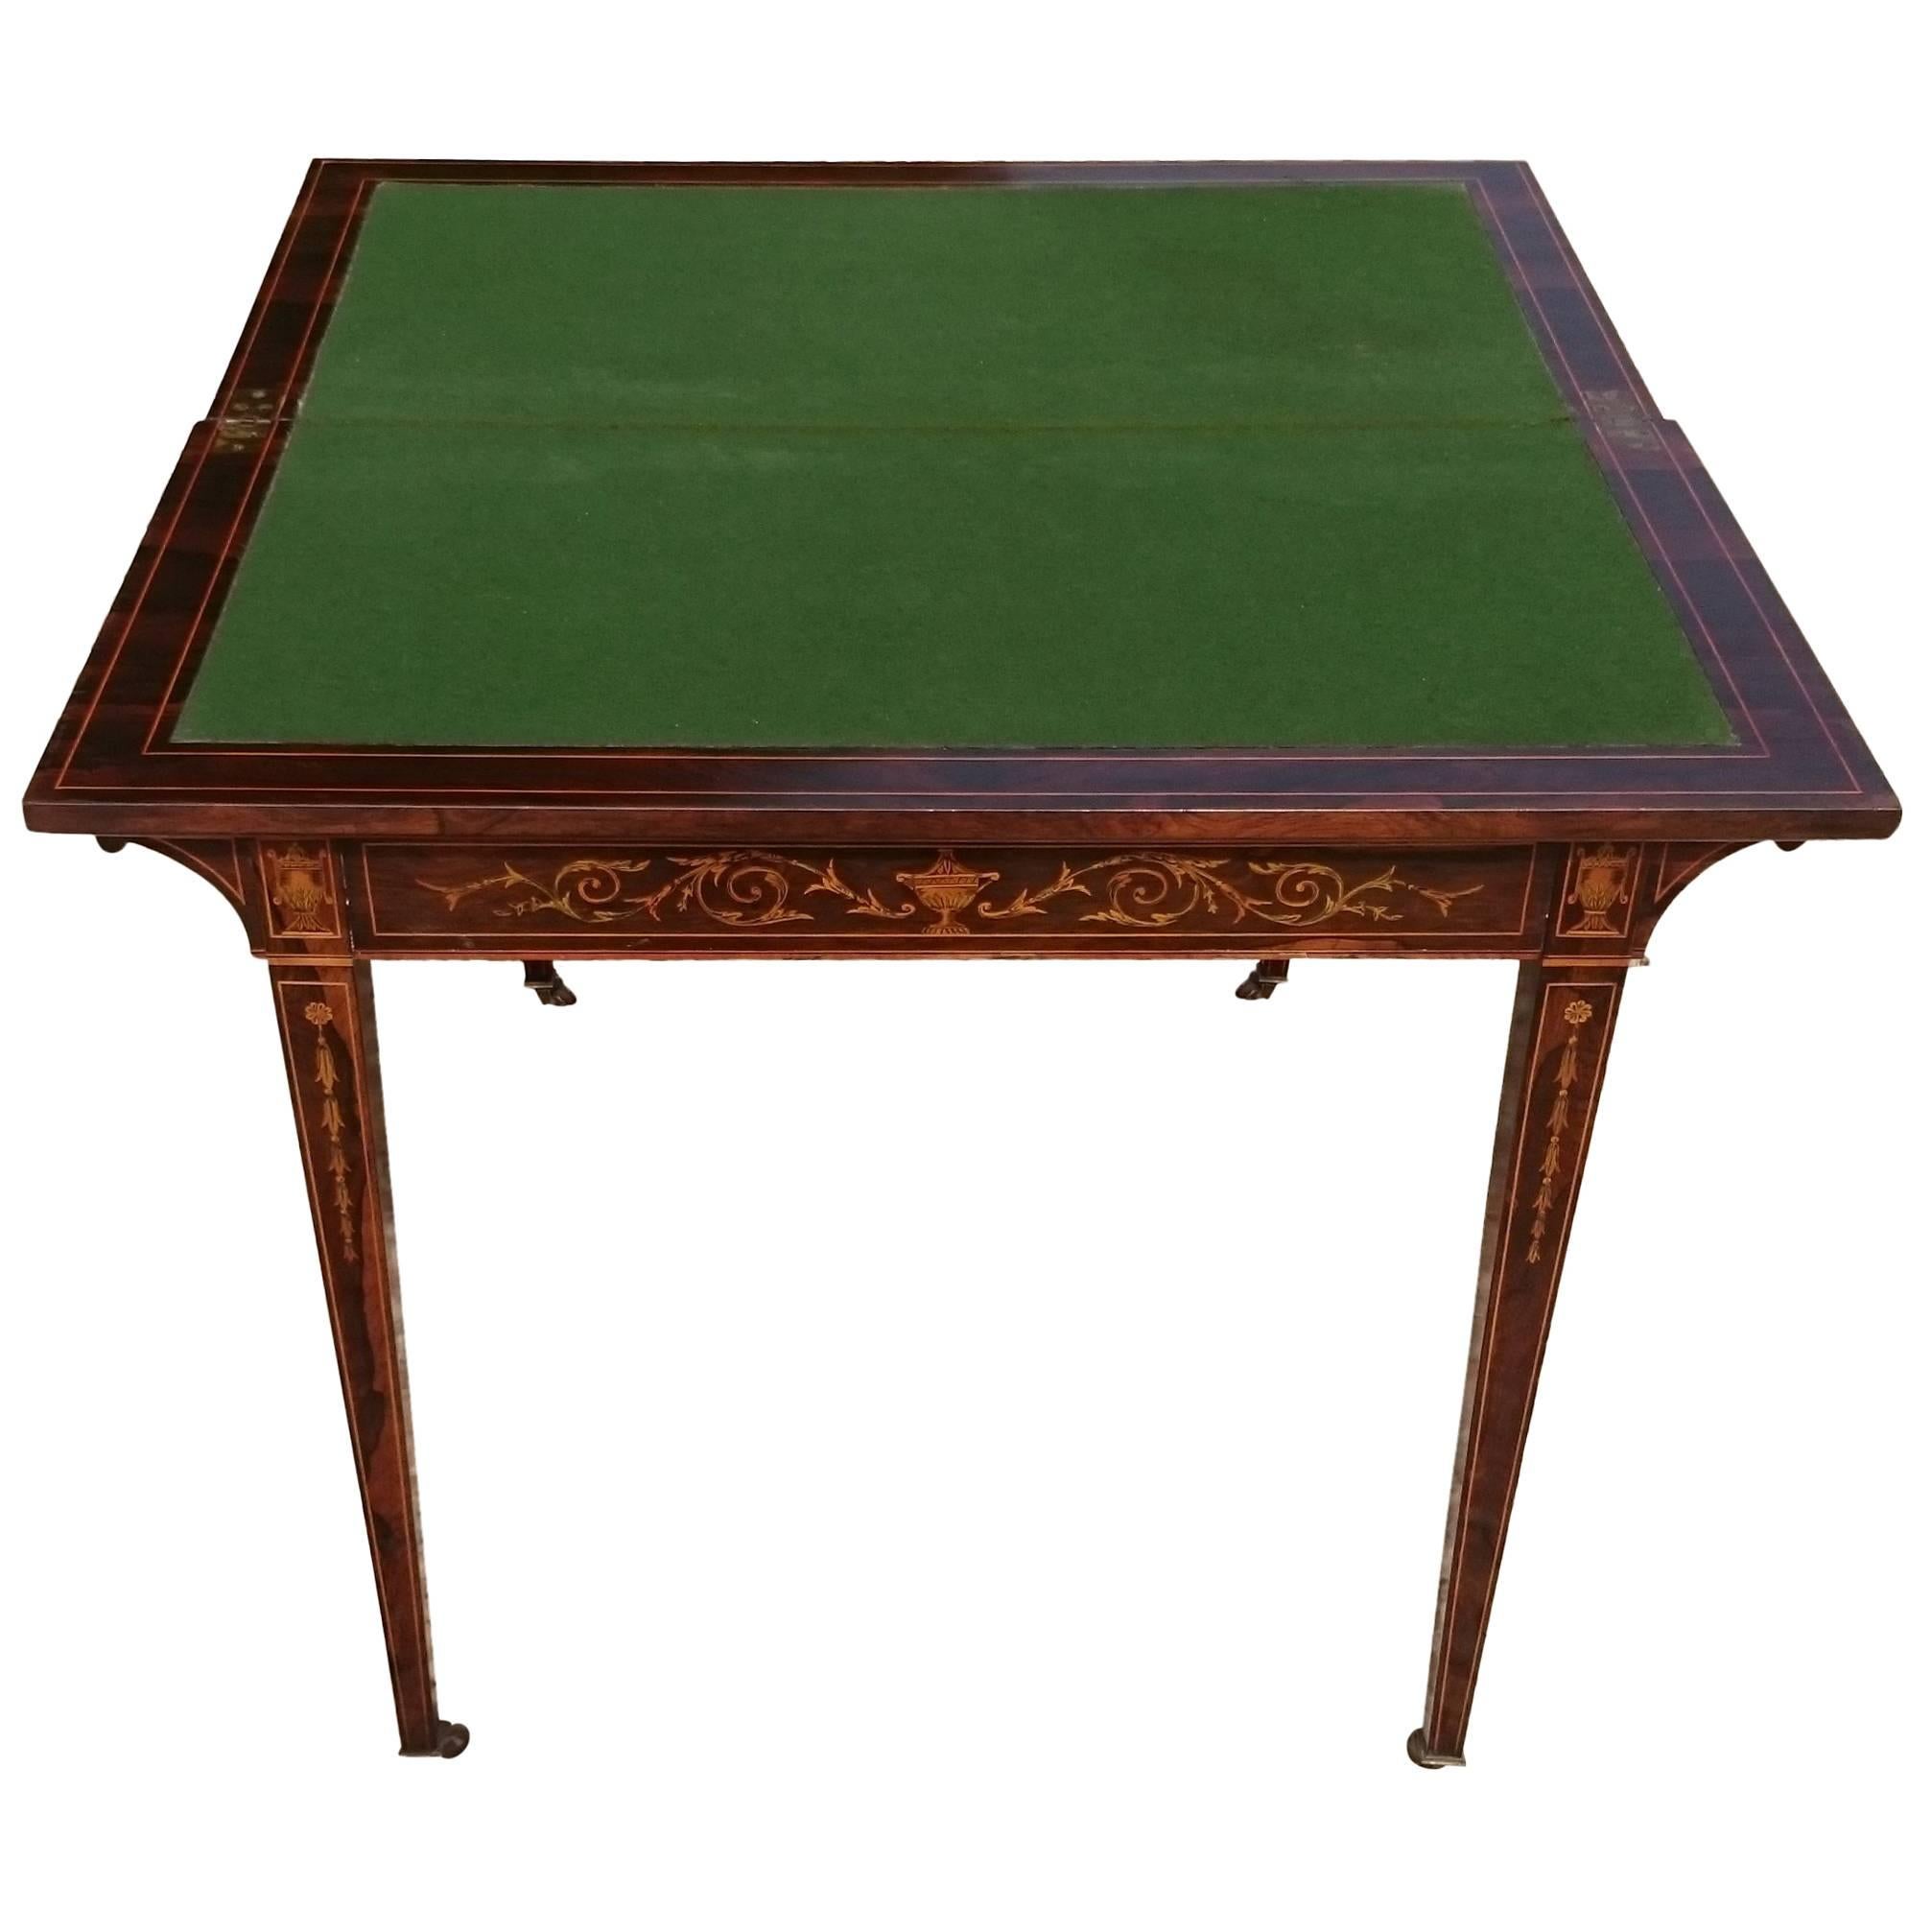 Early 20th Century Antique Card Table with Fine Inlaid Decoration